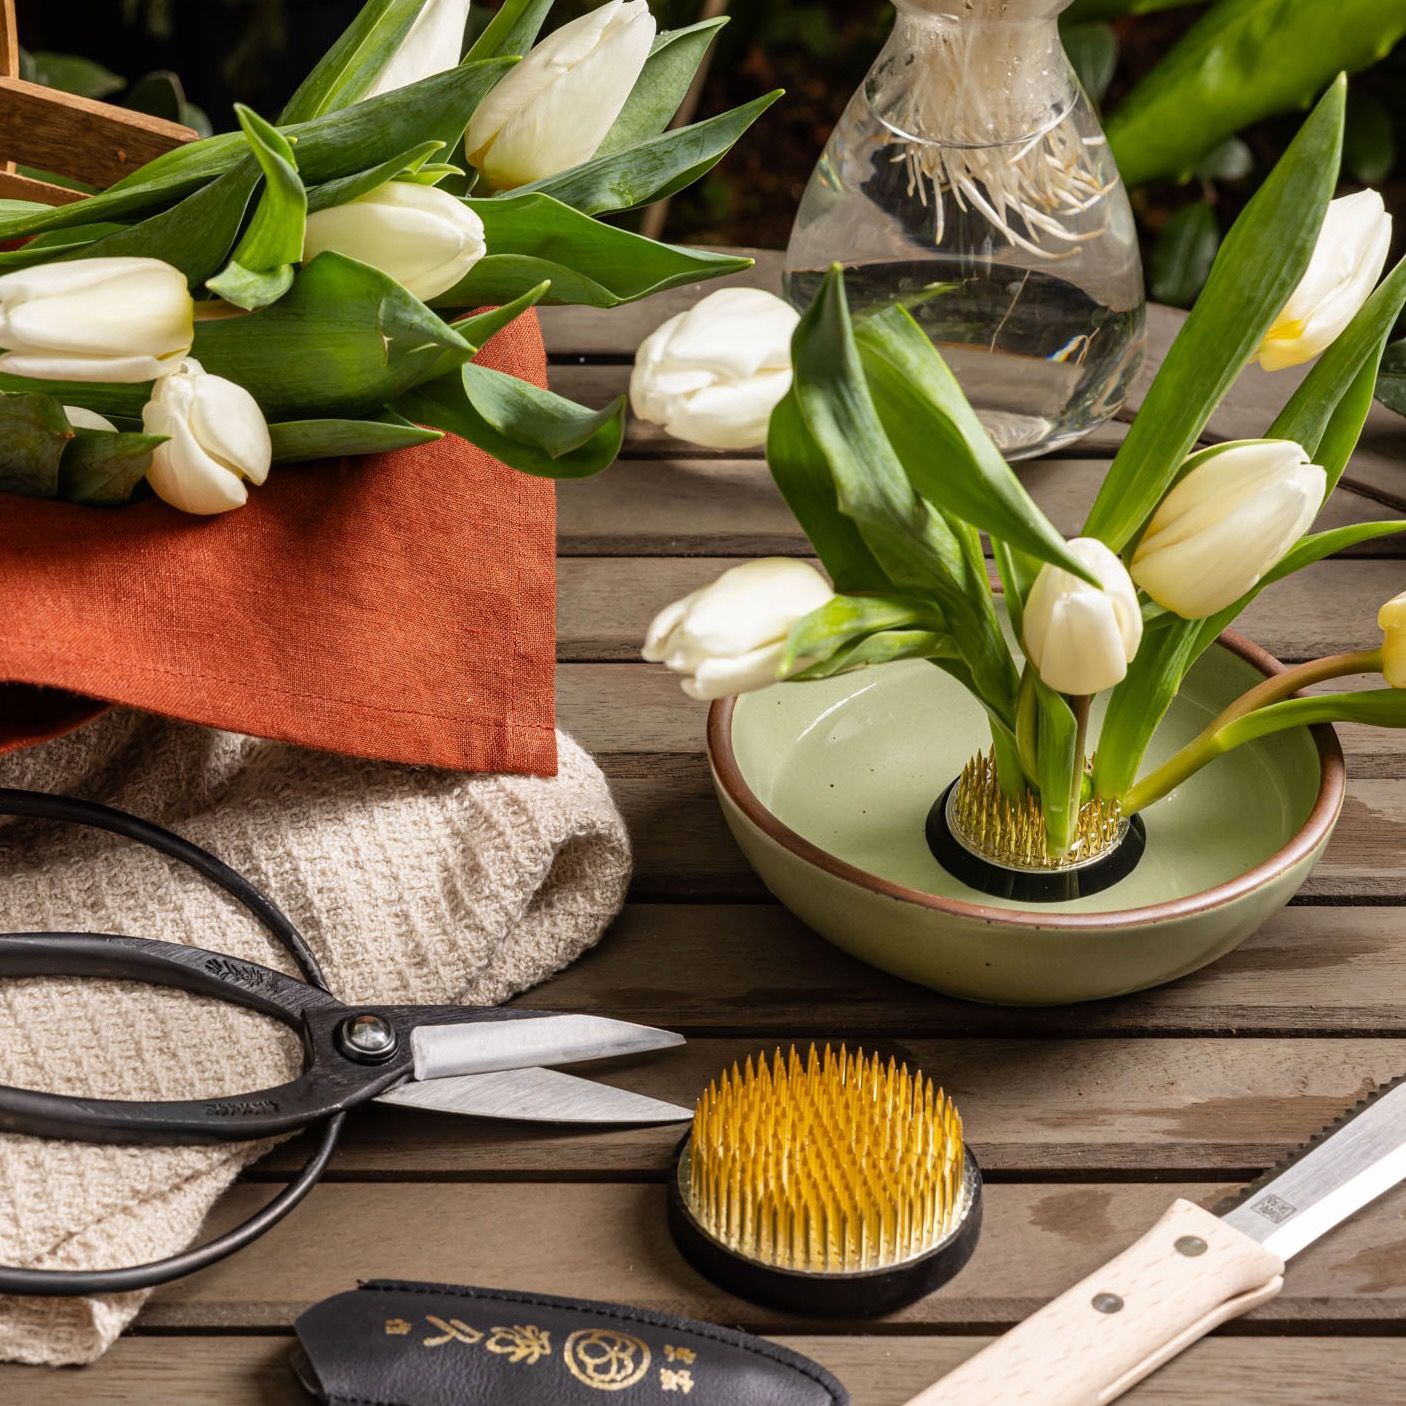 On a table are gardening and floral accessories, including a flower frog by itself, a flower frog with tulips on it in a shallow bowl with water, garden snips, a gardening knife, and a basket of tulips.